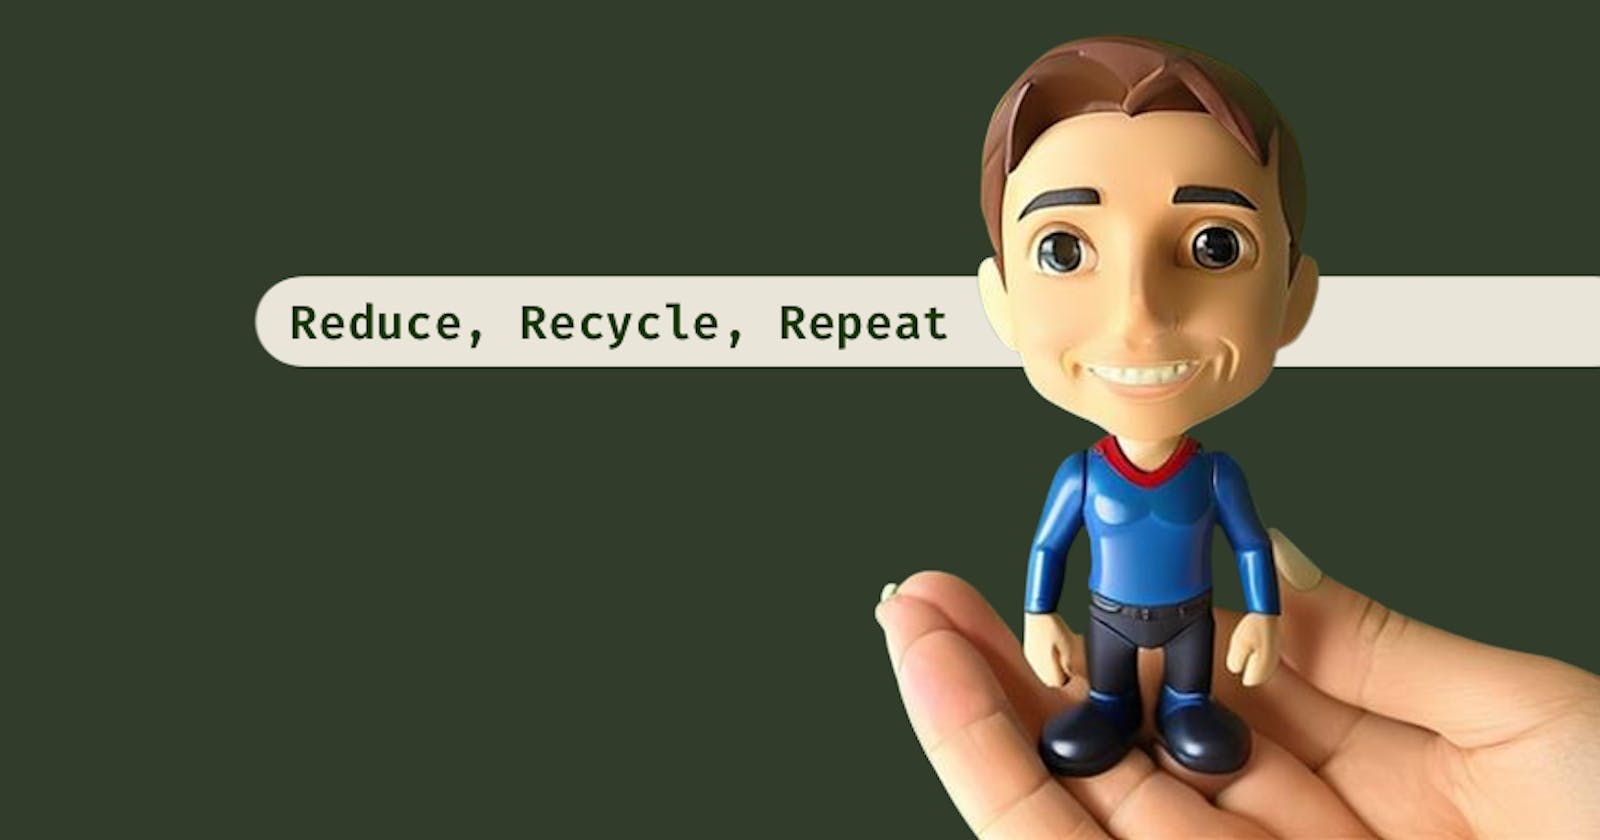 The 3 Rs: Reduce, Recycle, Repeat